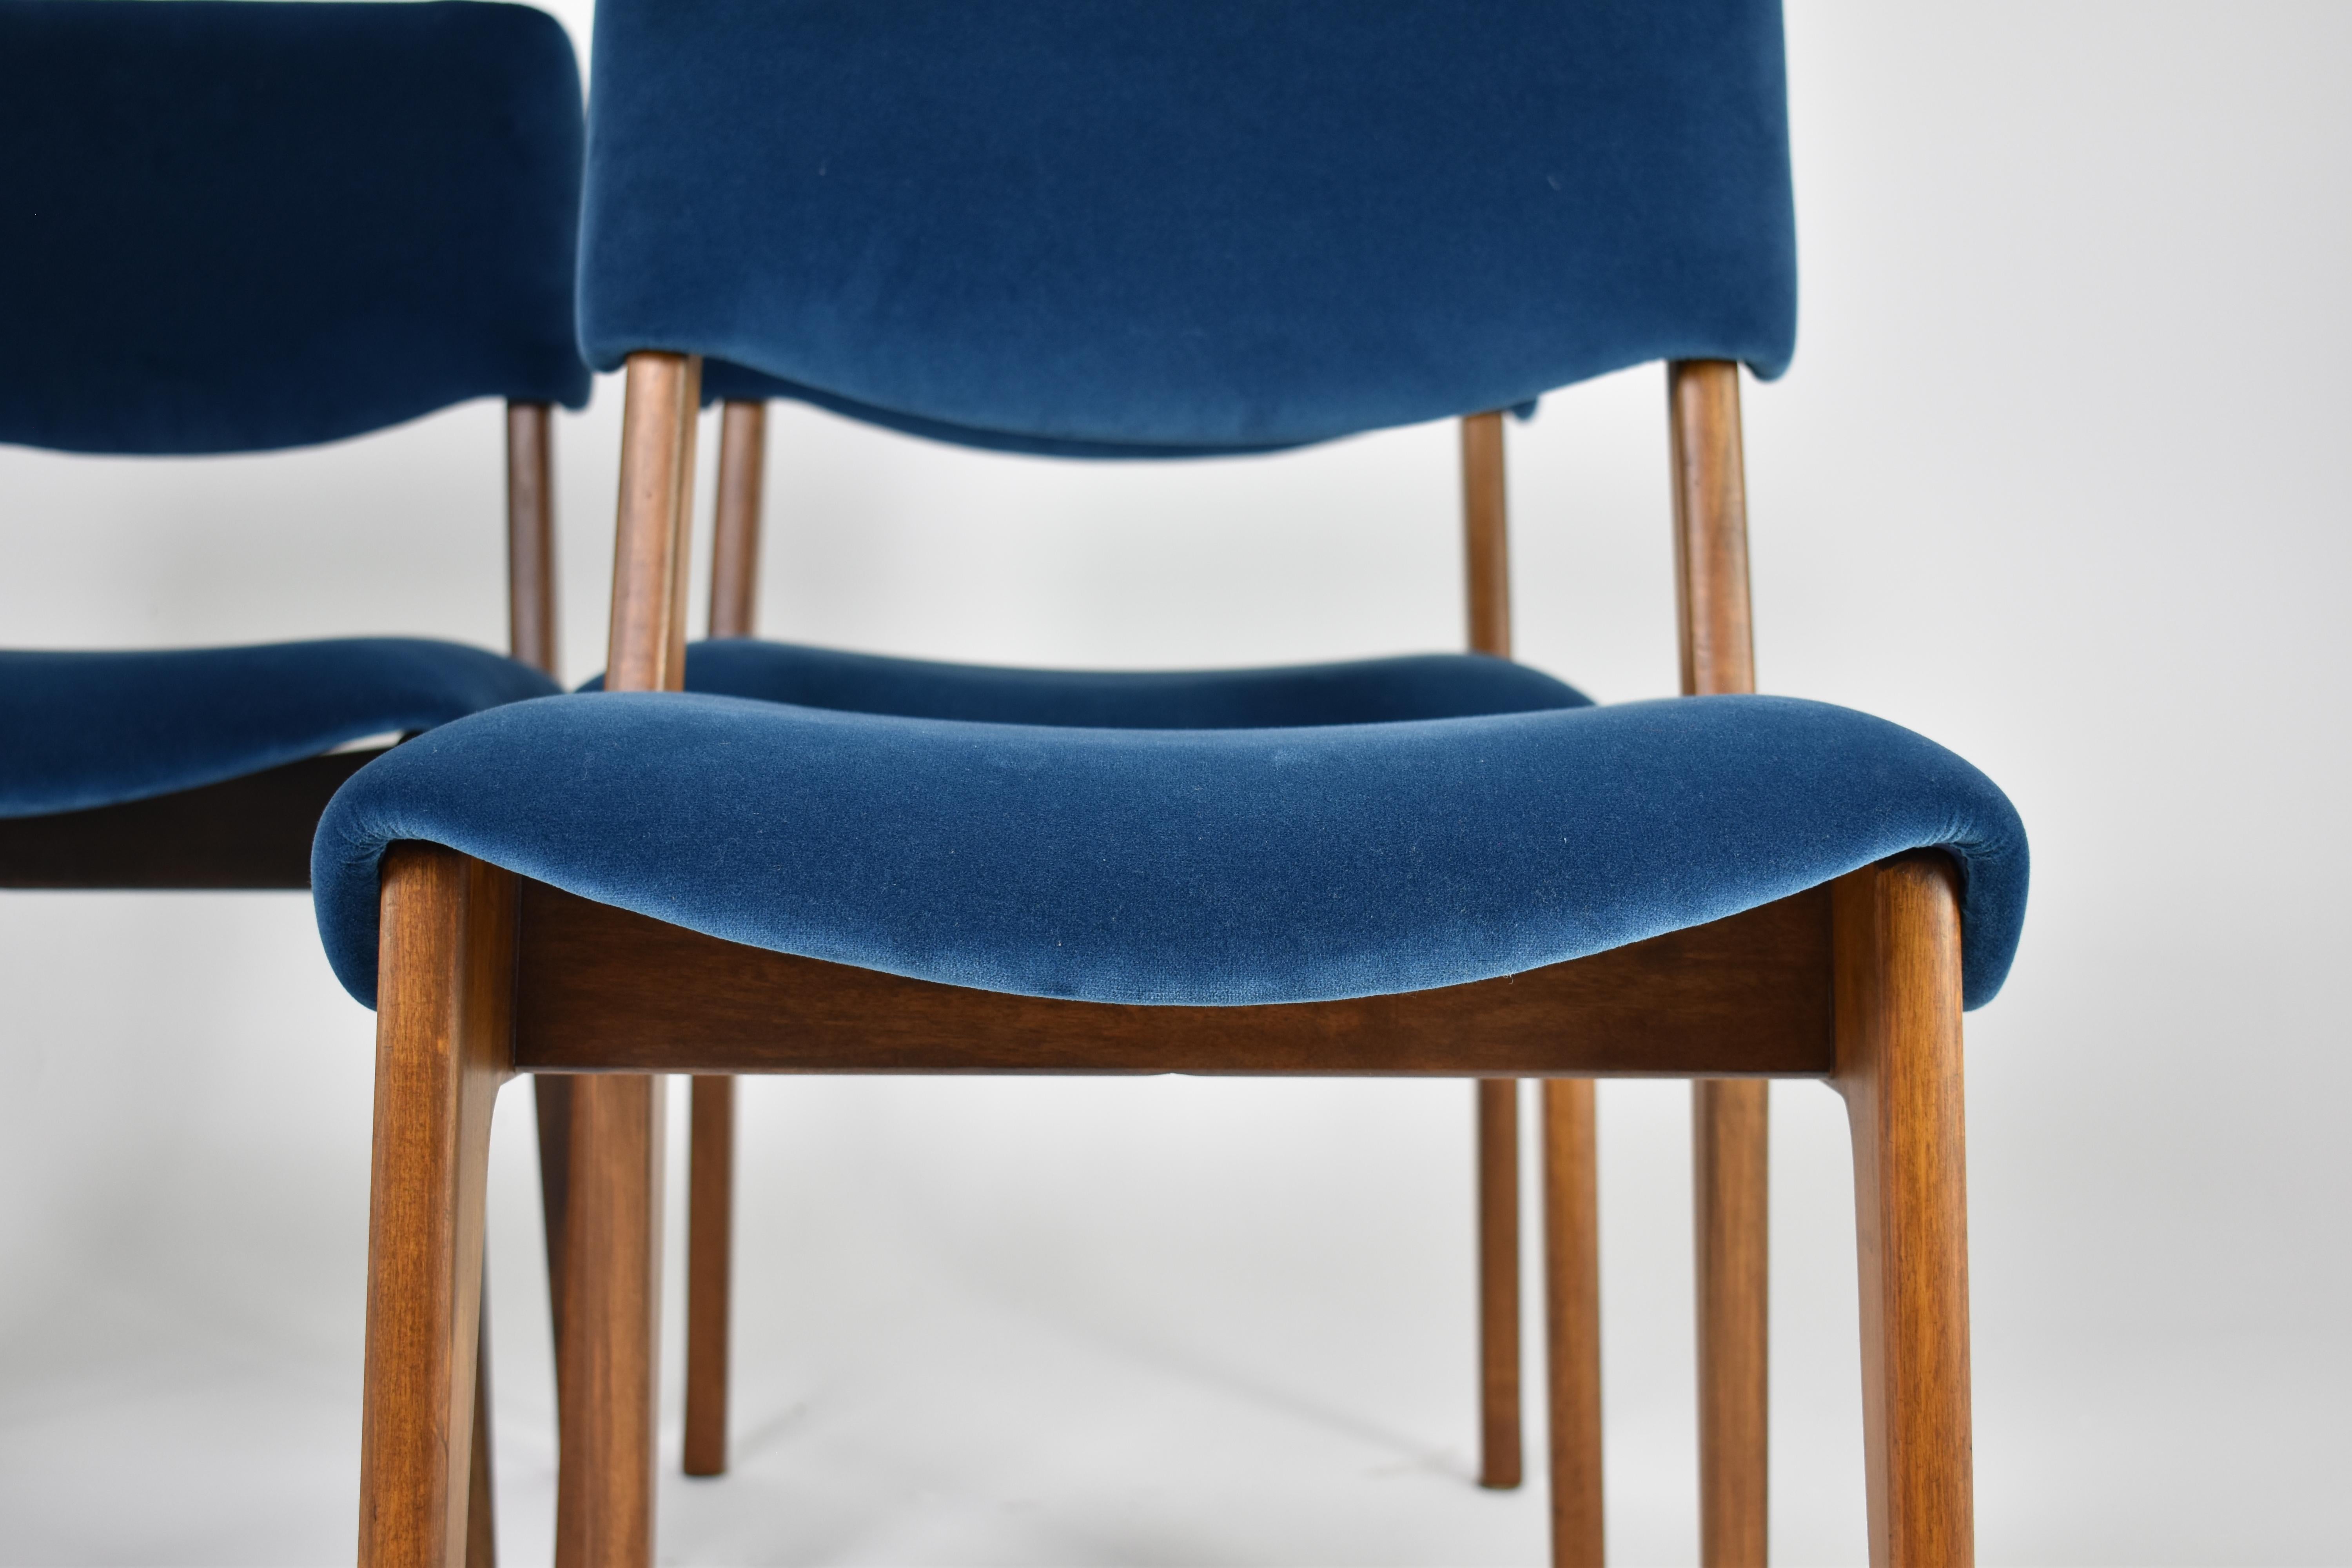 Mid-20th Century Italian Ico Parisi Wooden Dining Chairs, Set of Four, 1950s-60s For Sale